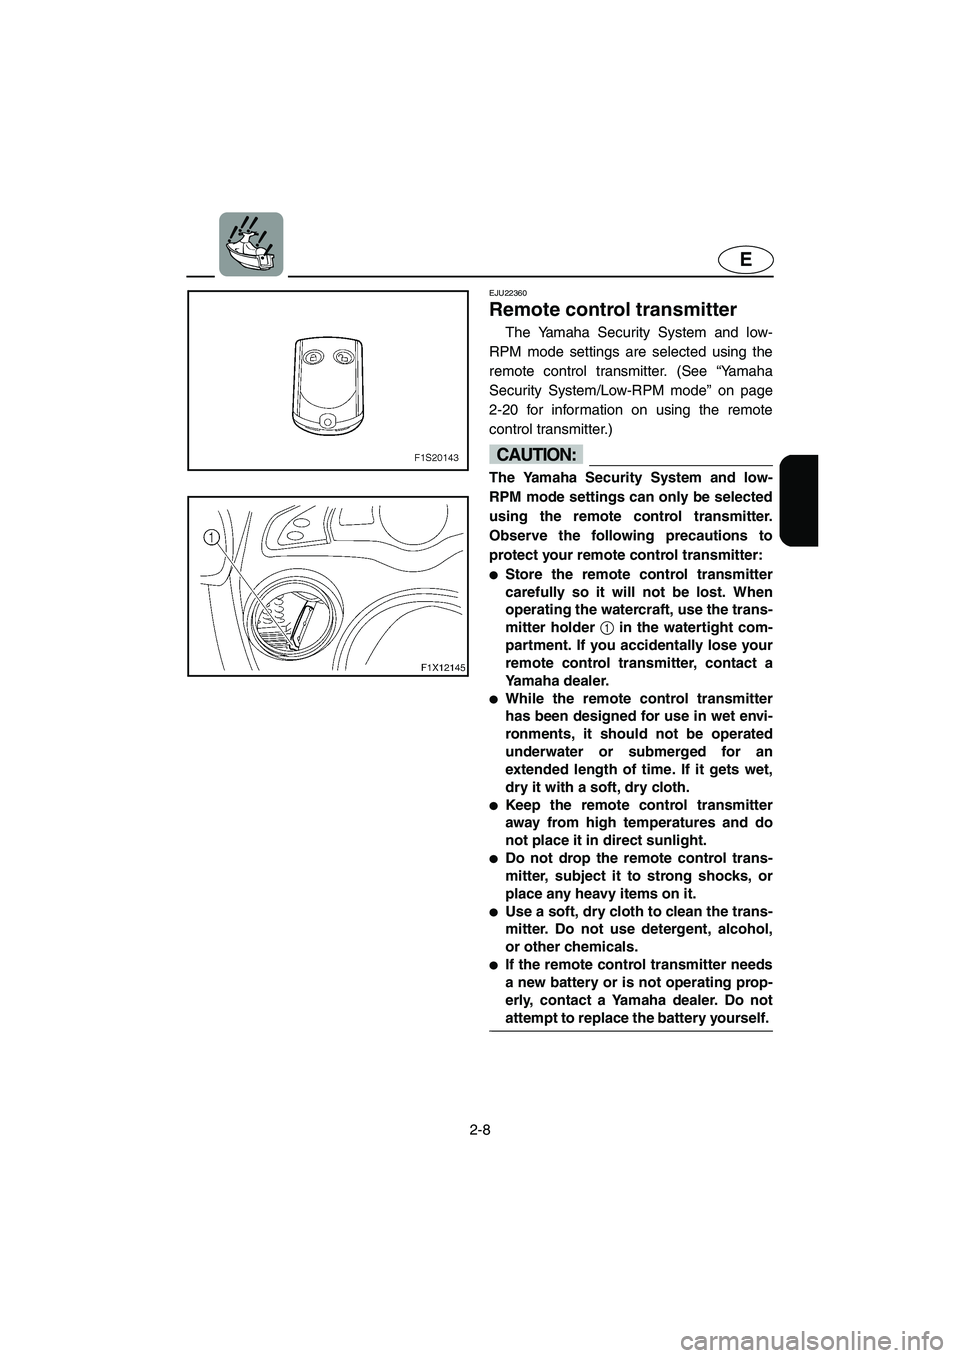 YAMAHA FX HO 2006  Owners Manual 2-8
E
EJU22360 
Remote control transmitter 
The Yamaha Security System and low-
RPM mode settings are selected using the
remote control transmitter. (See “Yamaha
Security System/Low-RPM mode” on p